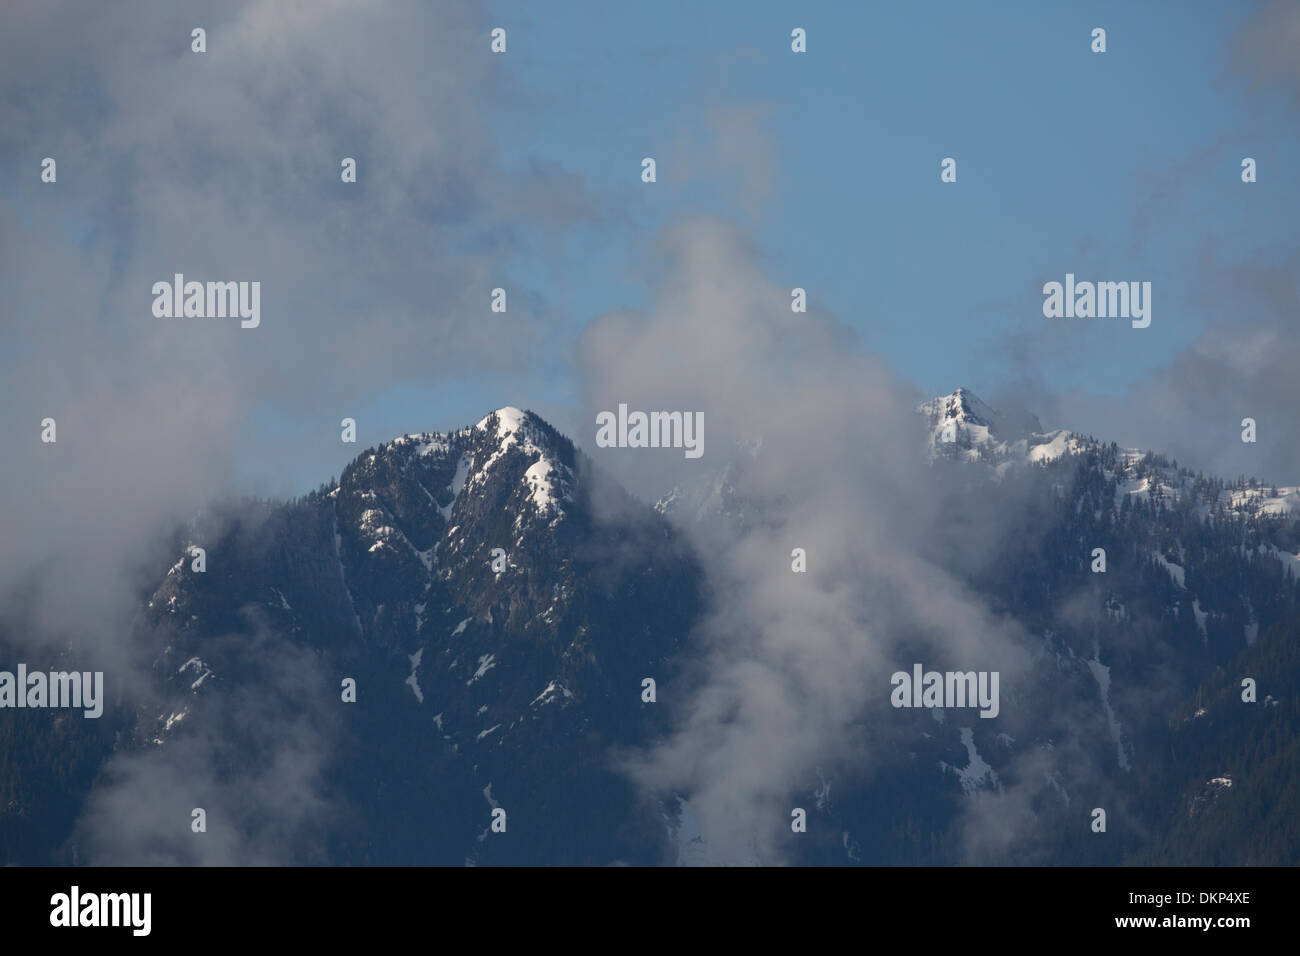 Snow-capped mountain peaks amid clouds in Vancouver, Canada. Stock Photo